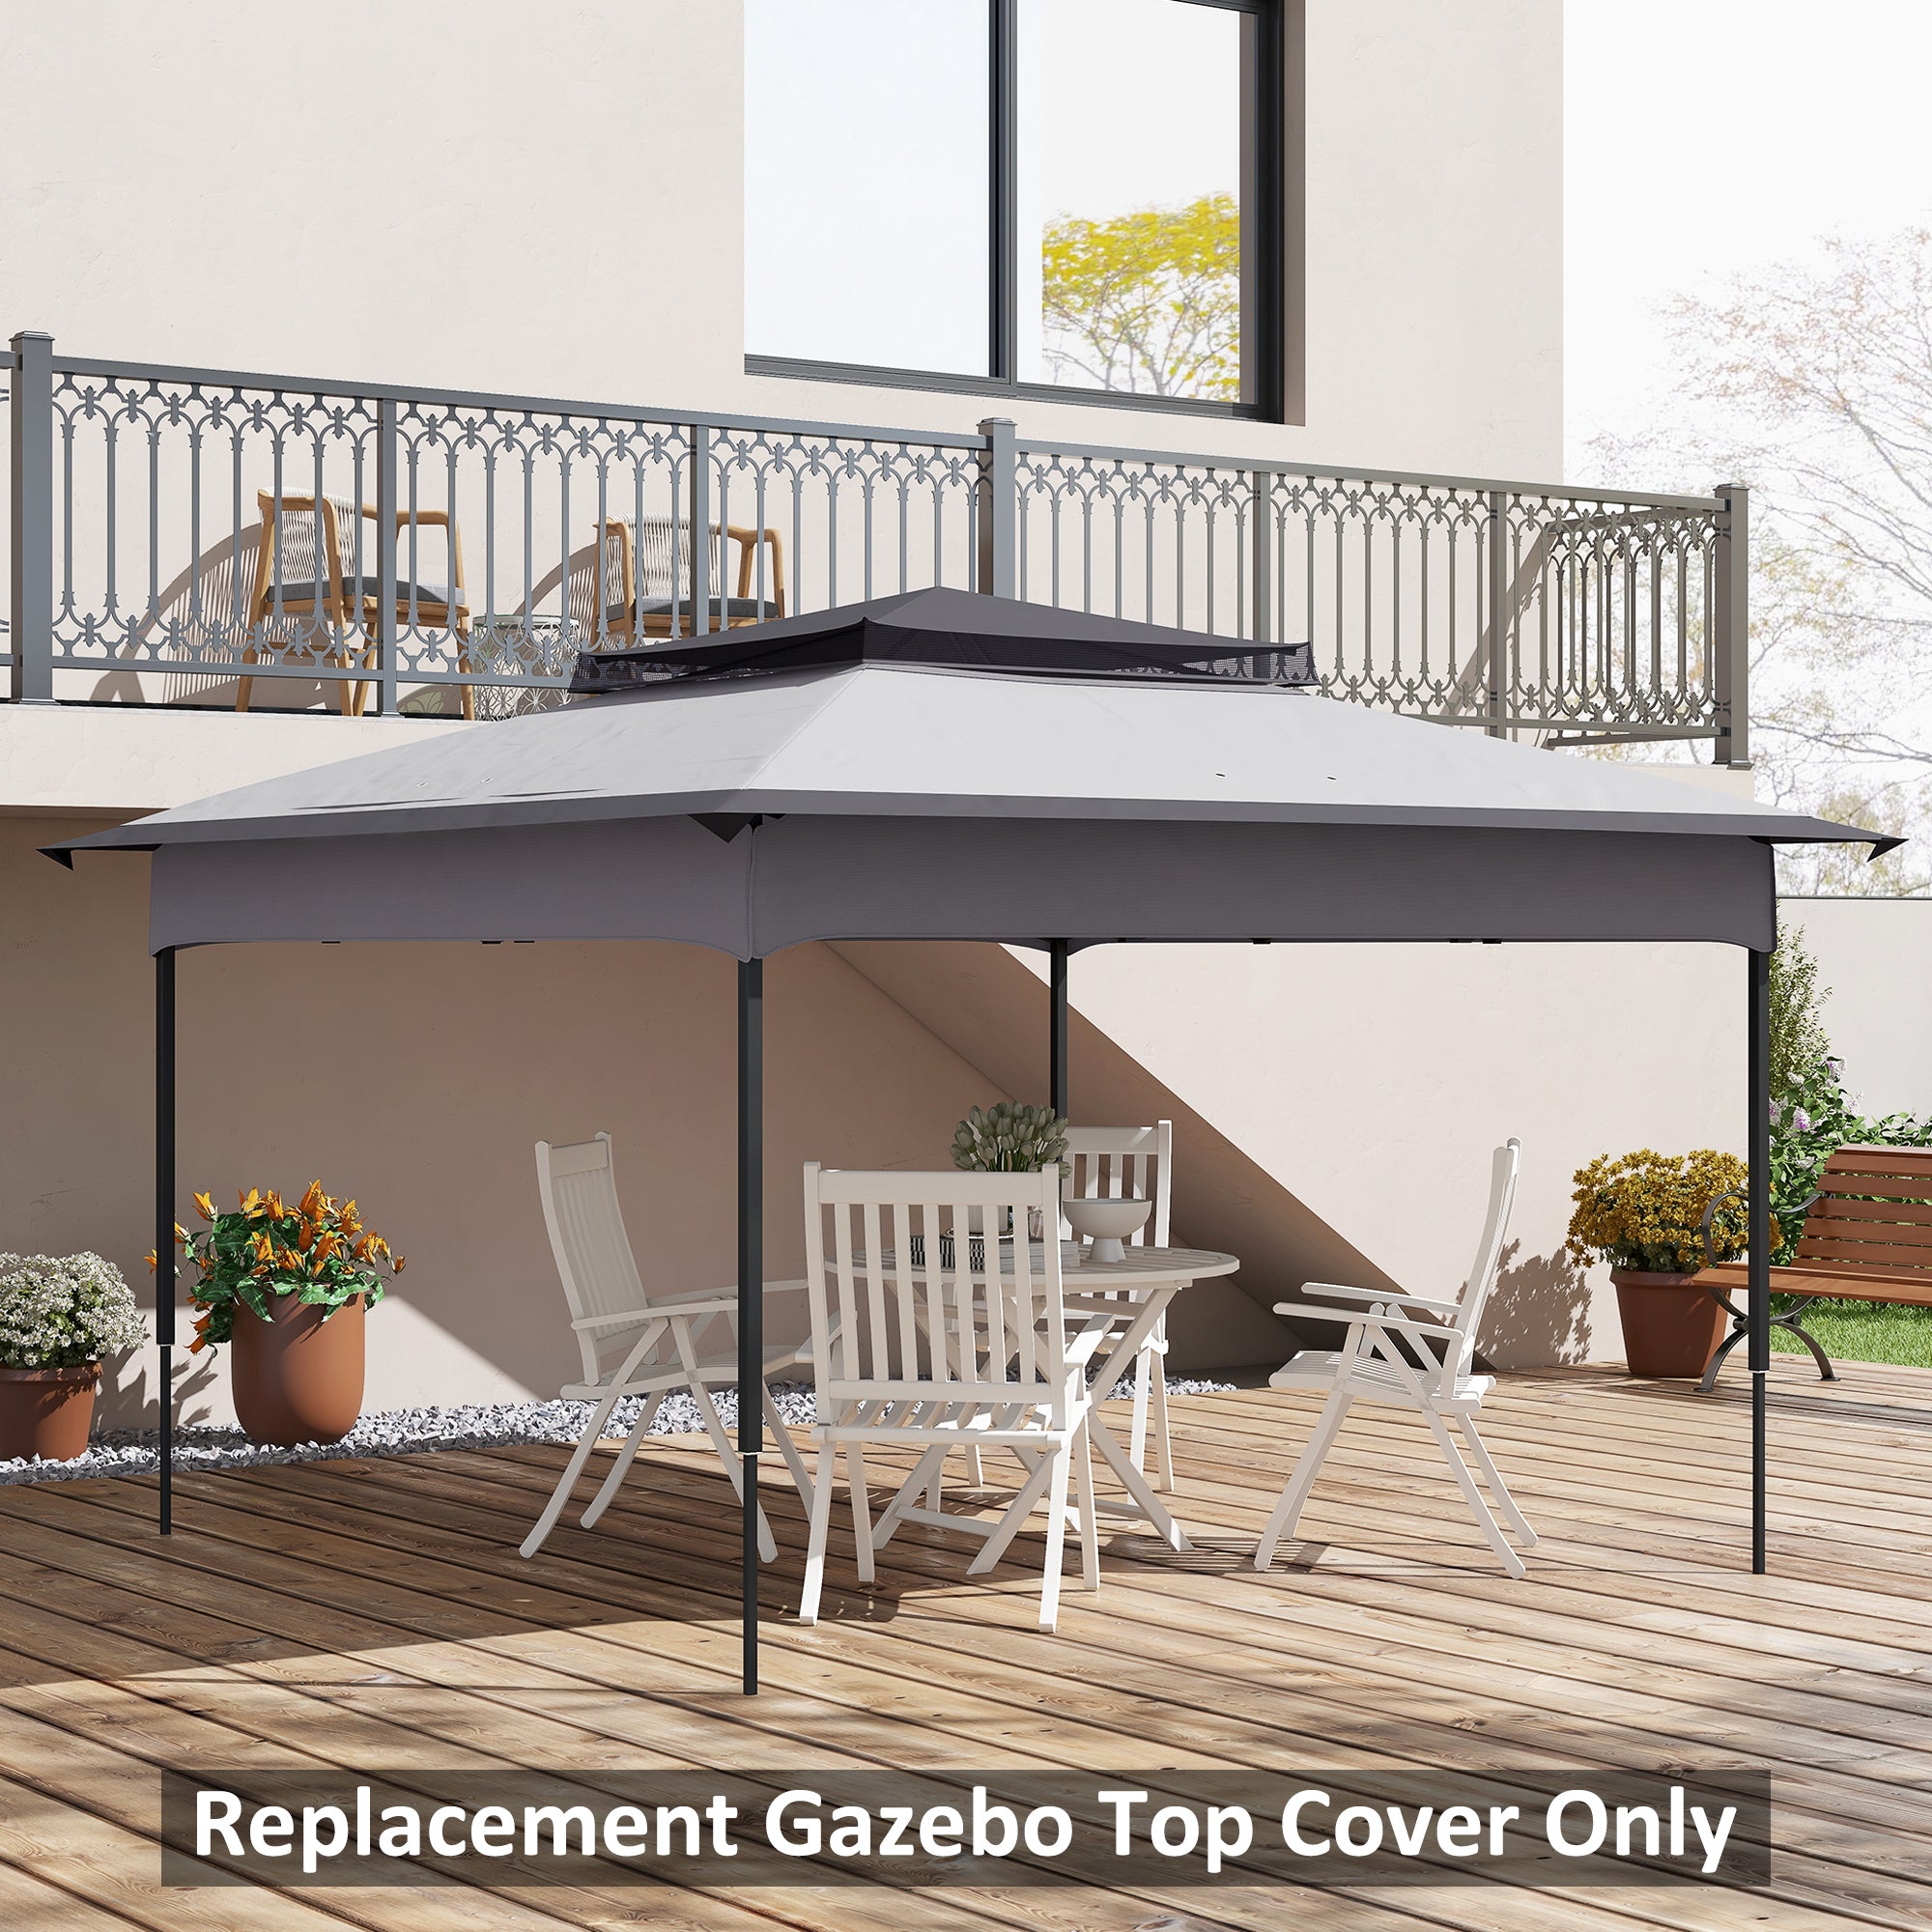 Outsunny Pop up Gazebo Cover, 2-Tier Gazebo Roof Replacement for 3.25m x 3.25m Frame, 30+ UV Protection, Grey